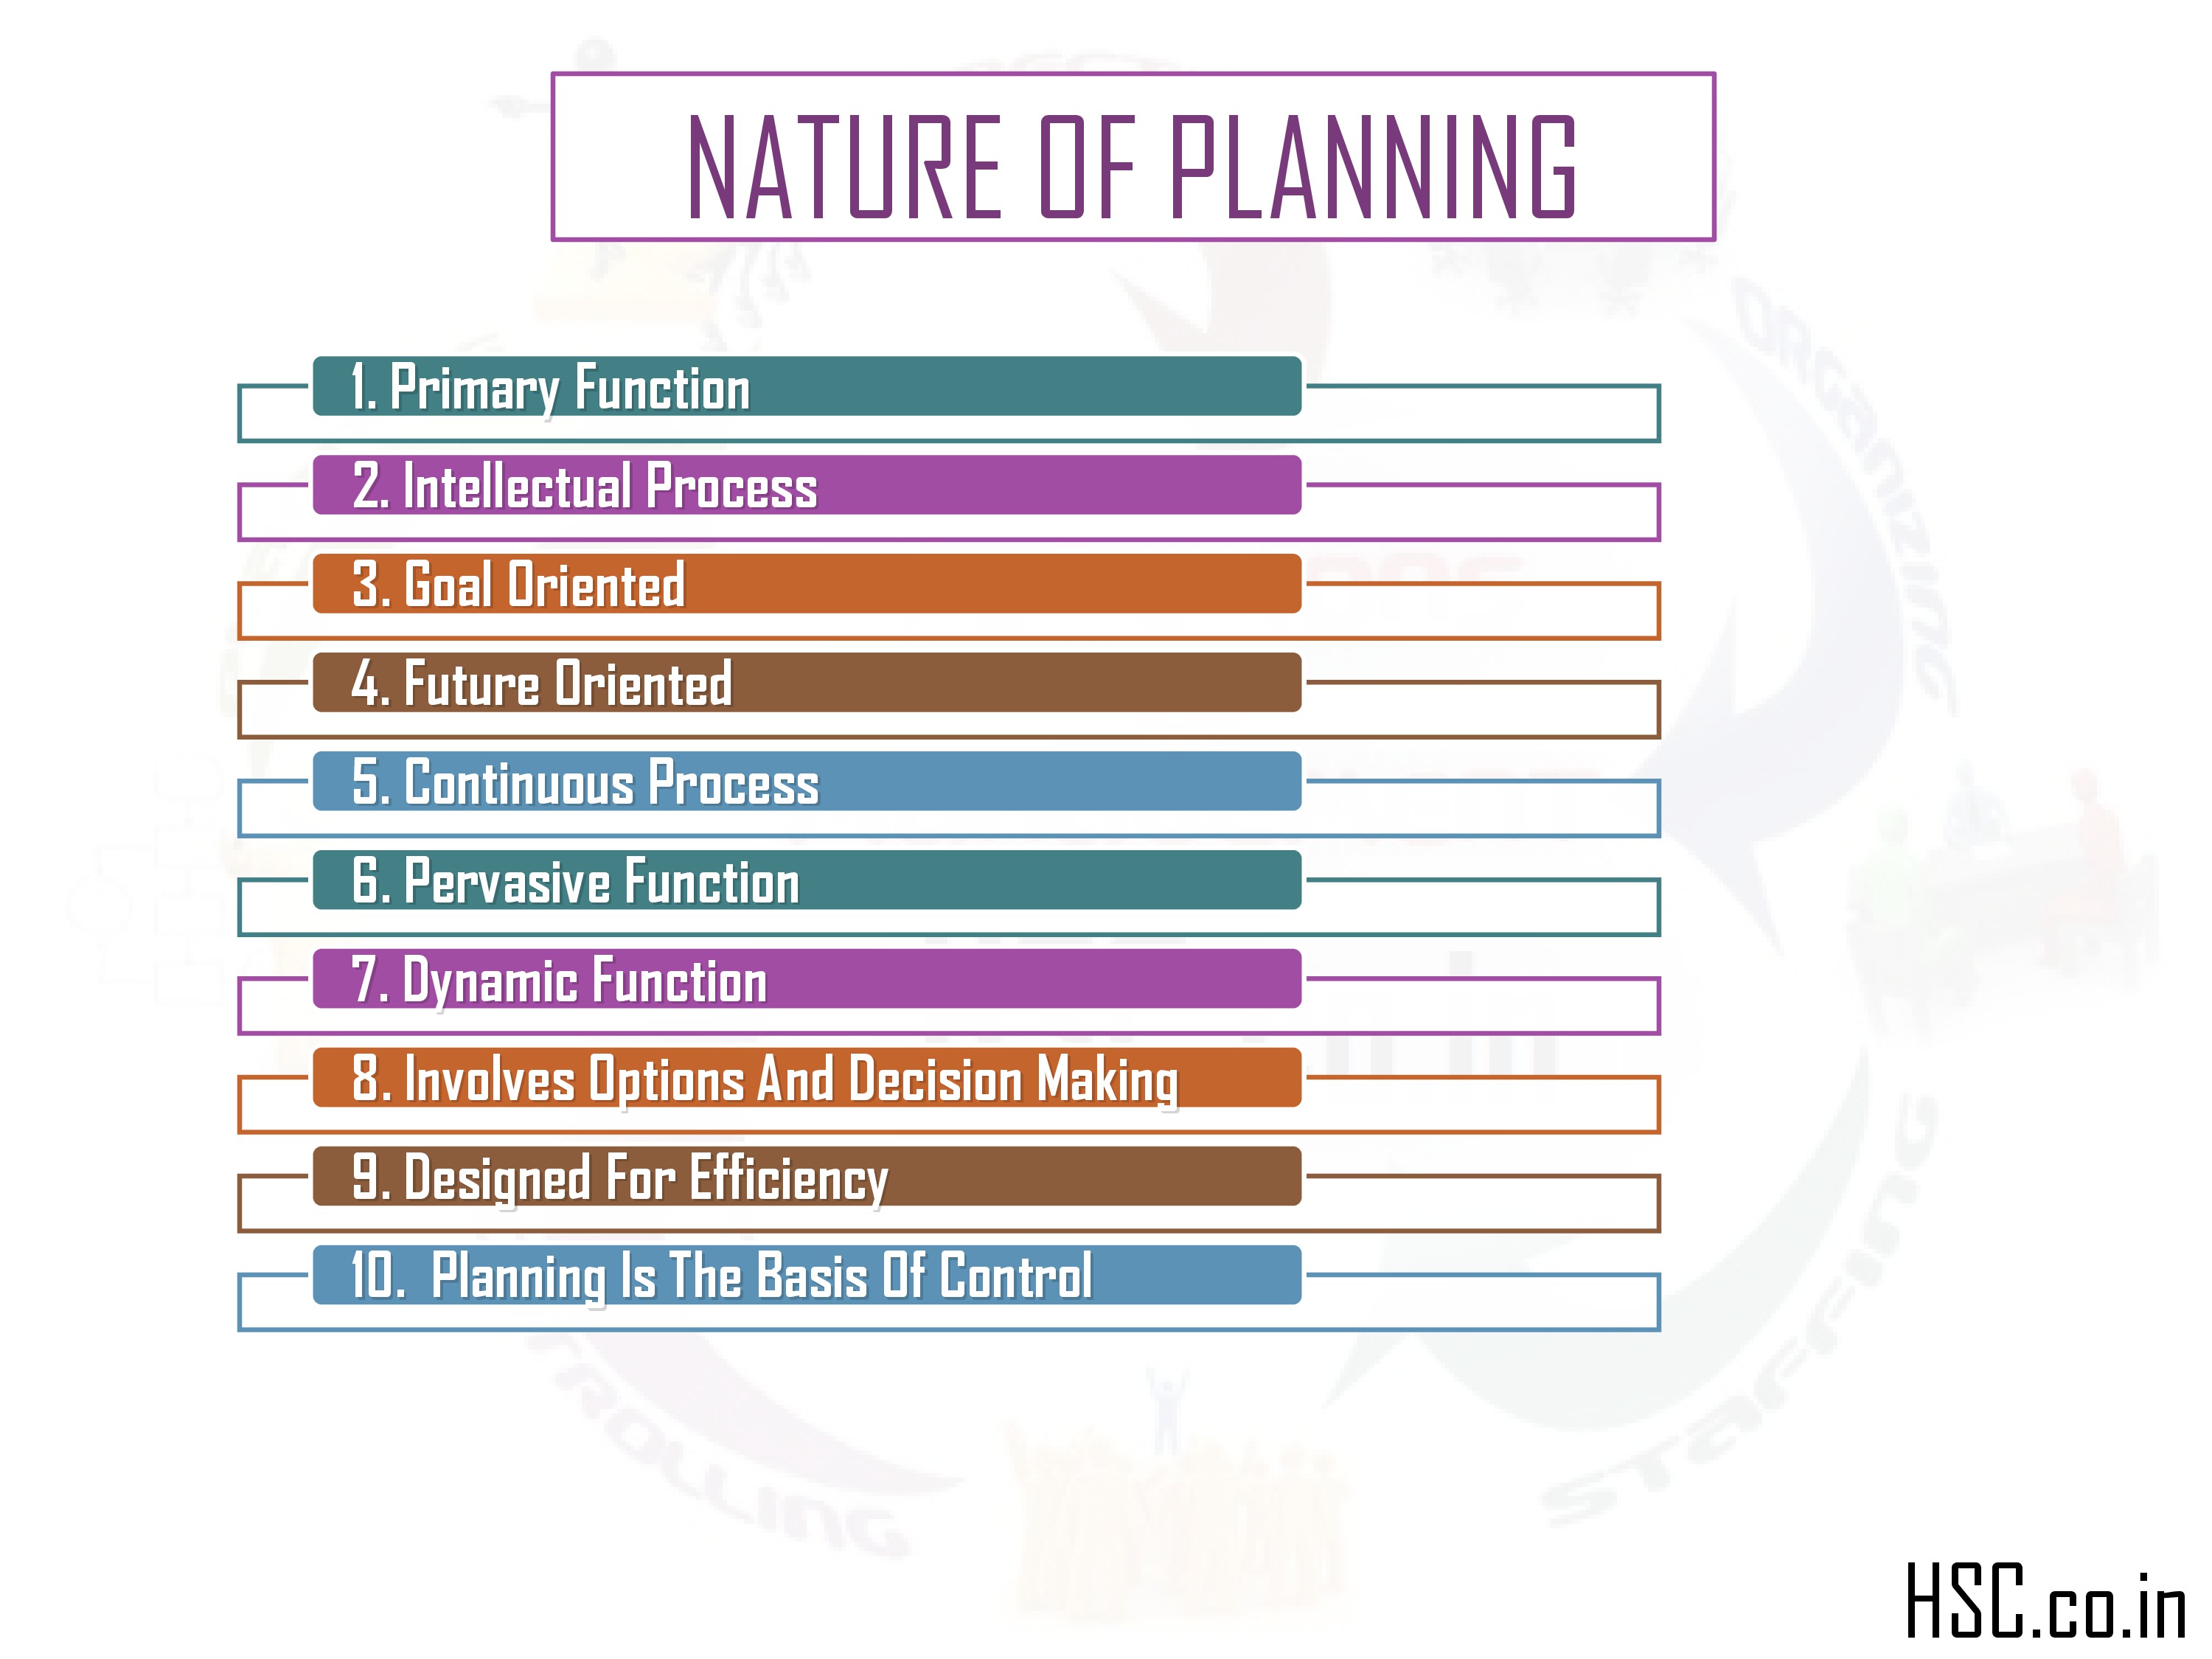 Nature of planning